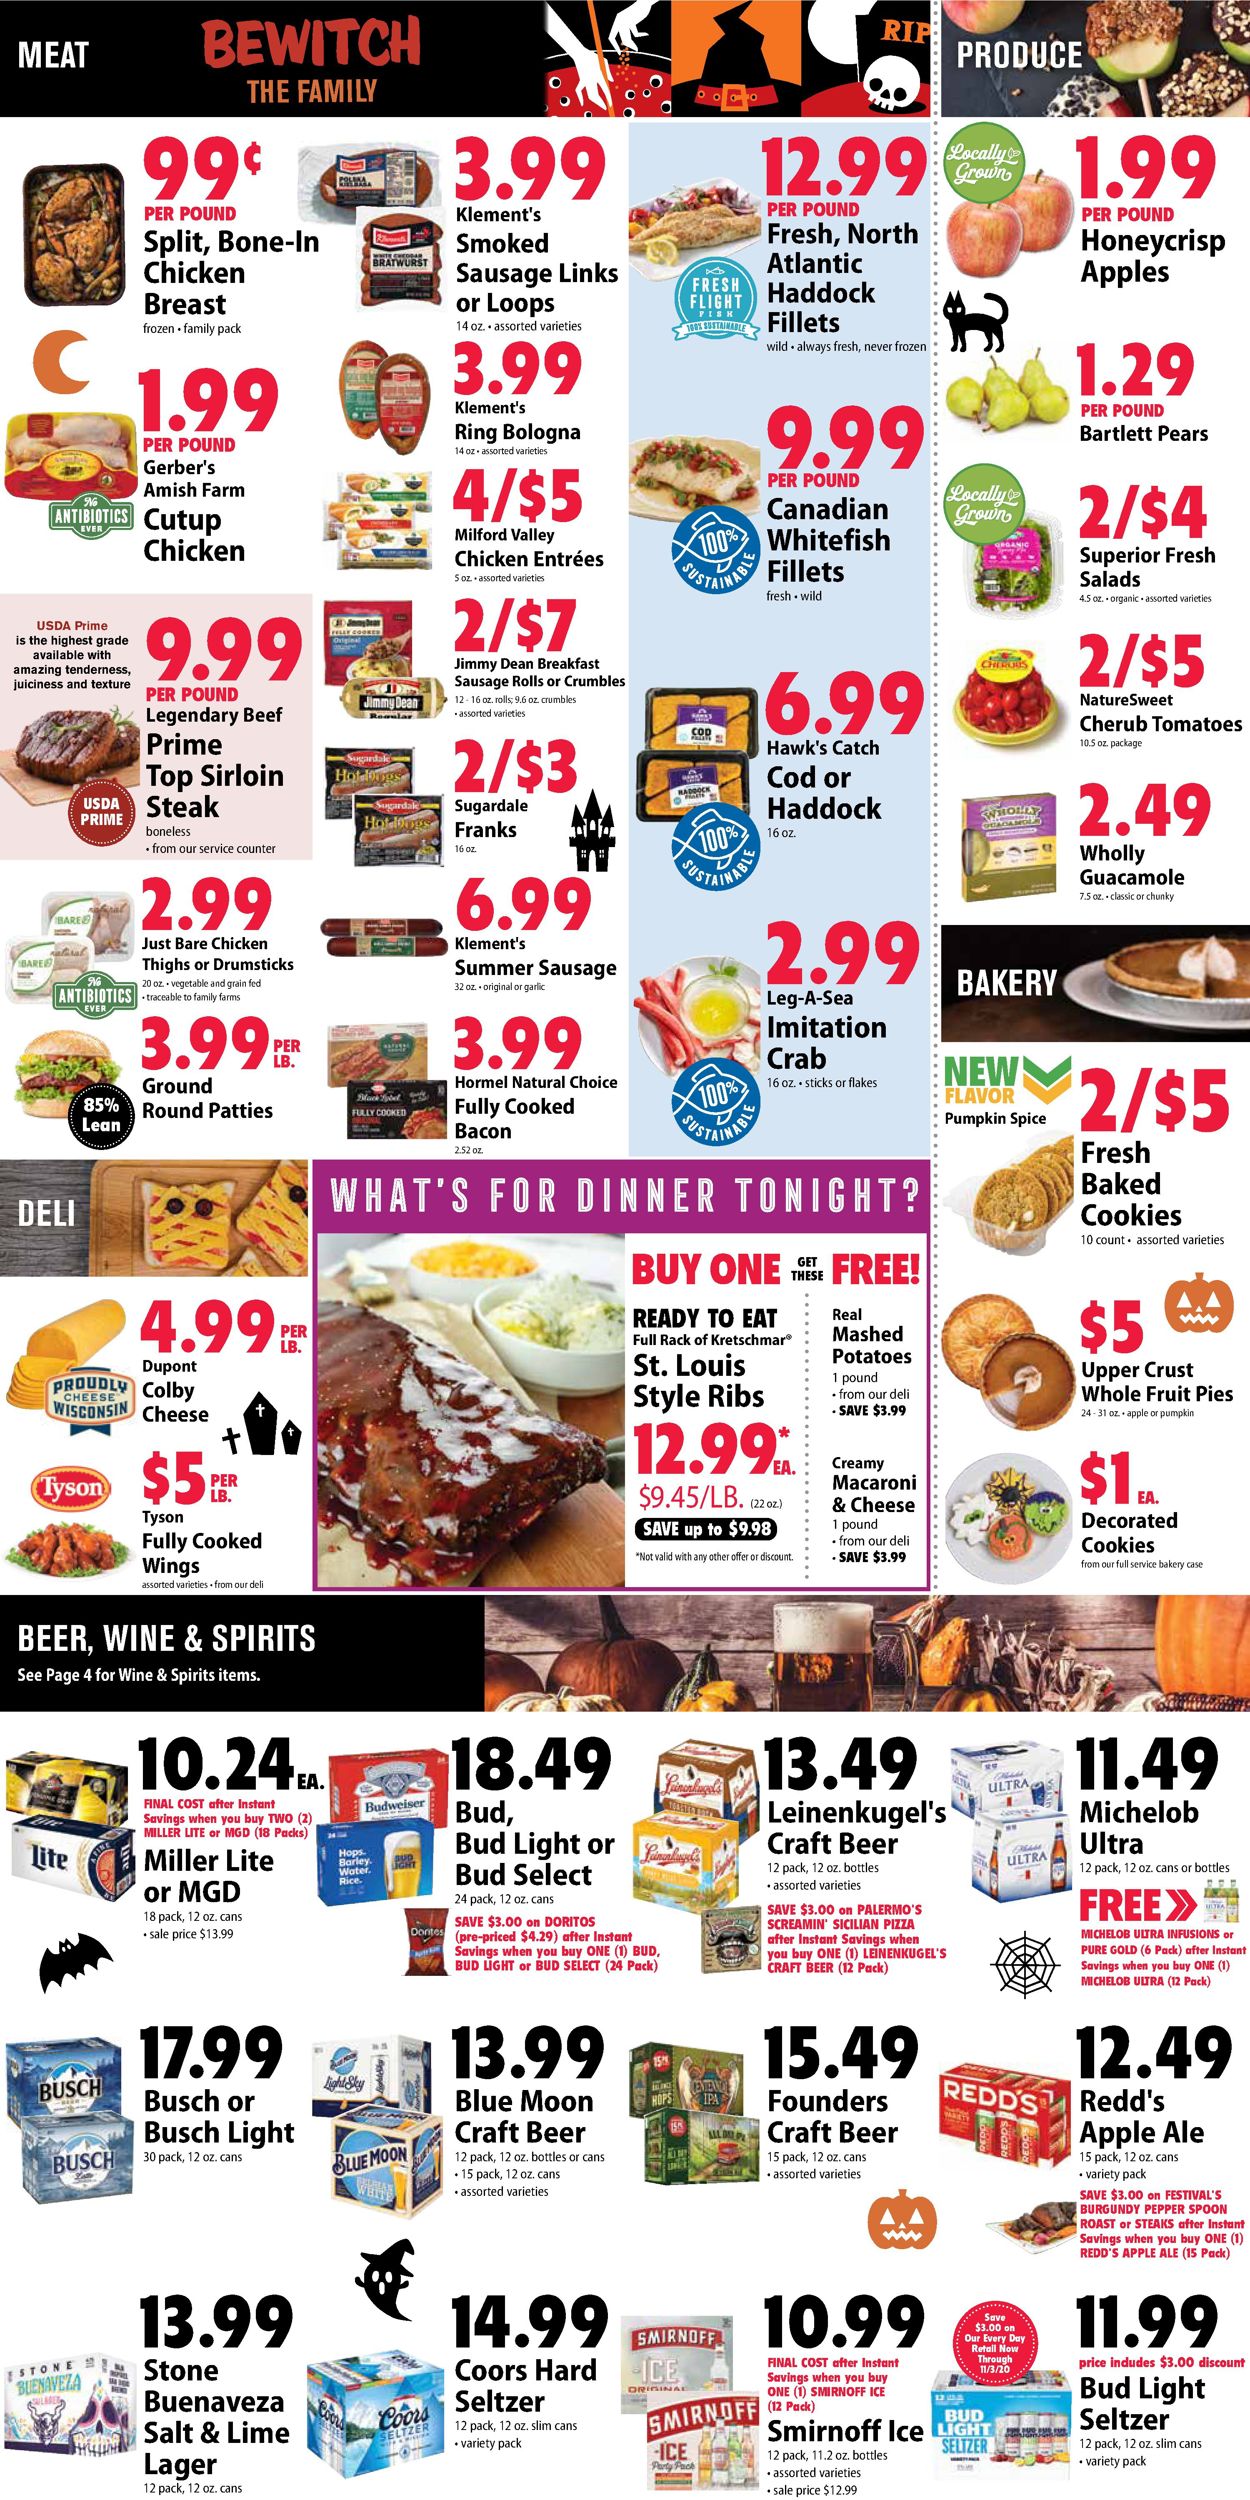 Festival Foods Current weekly ad 10/28 11/03/2020 [4]